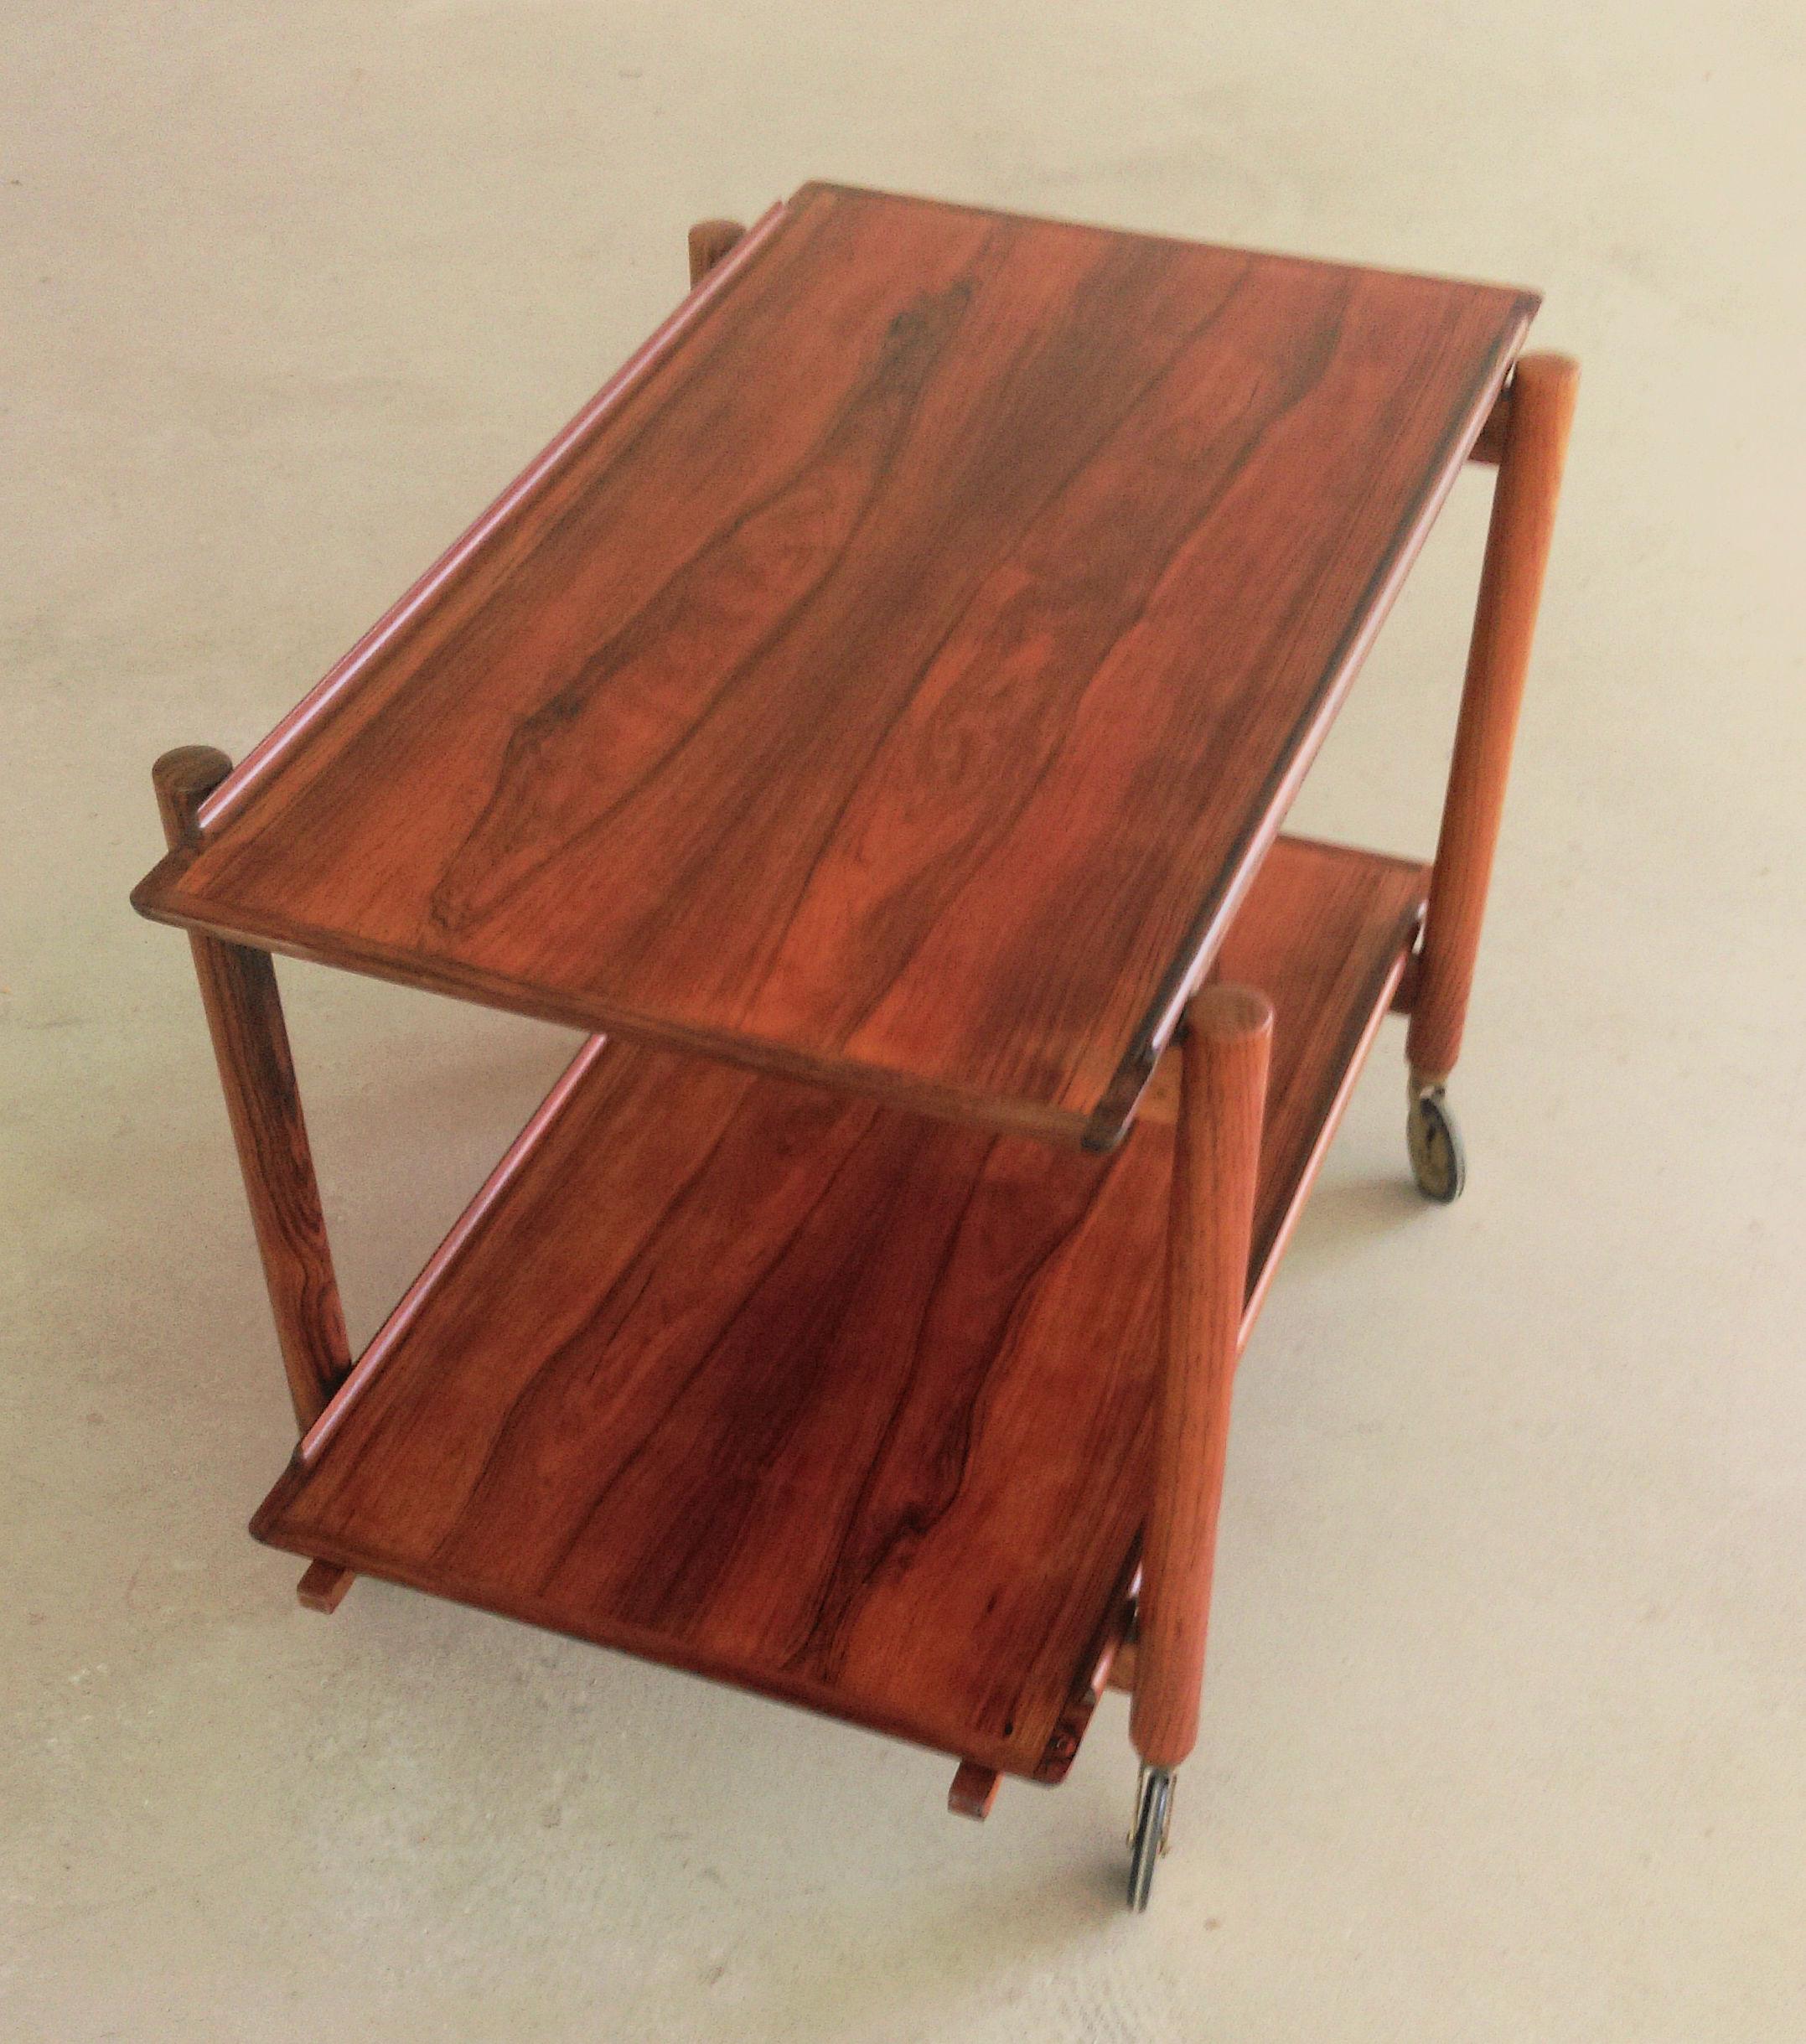 Poul Hundevad Fully Restored Multi Functional Danish Modular Rosewood Bar Table In Good Condition For Sale In Knebel, DK